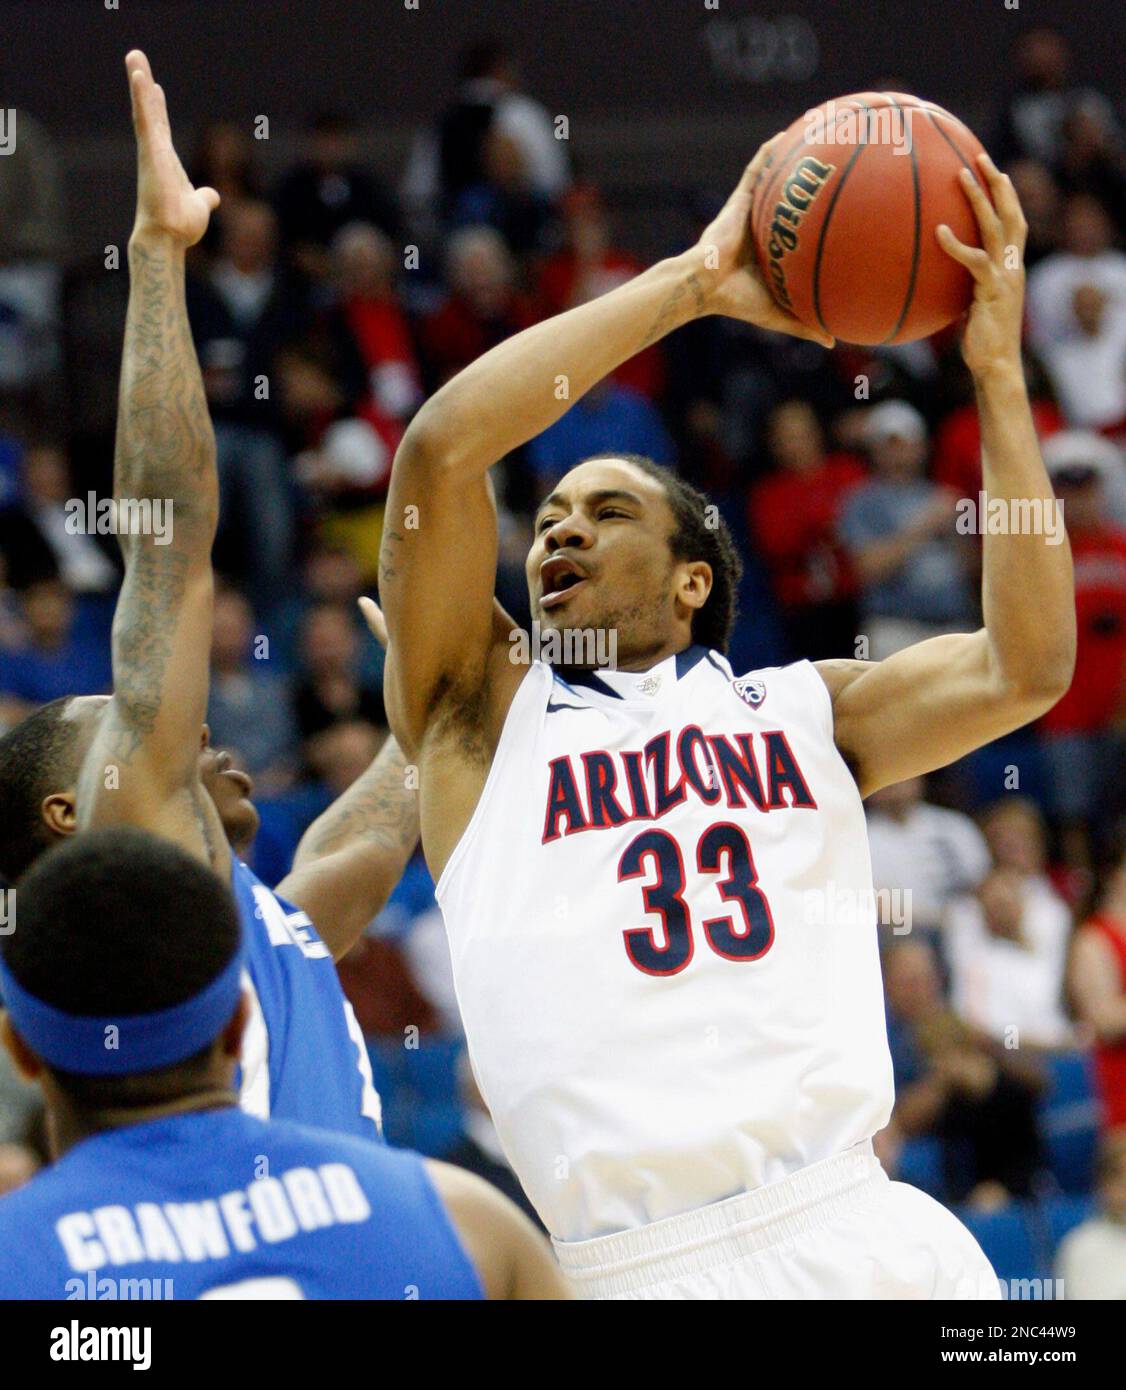 Arizona forward Jesse Perry (33) shoots as Memphis guard Antonio Barton  defends during the first half of a West Regional NCAA tournament second  round college basketball game, Friday, March 18, 2011 in